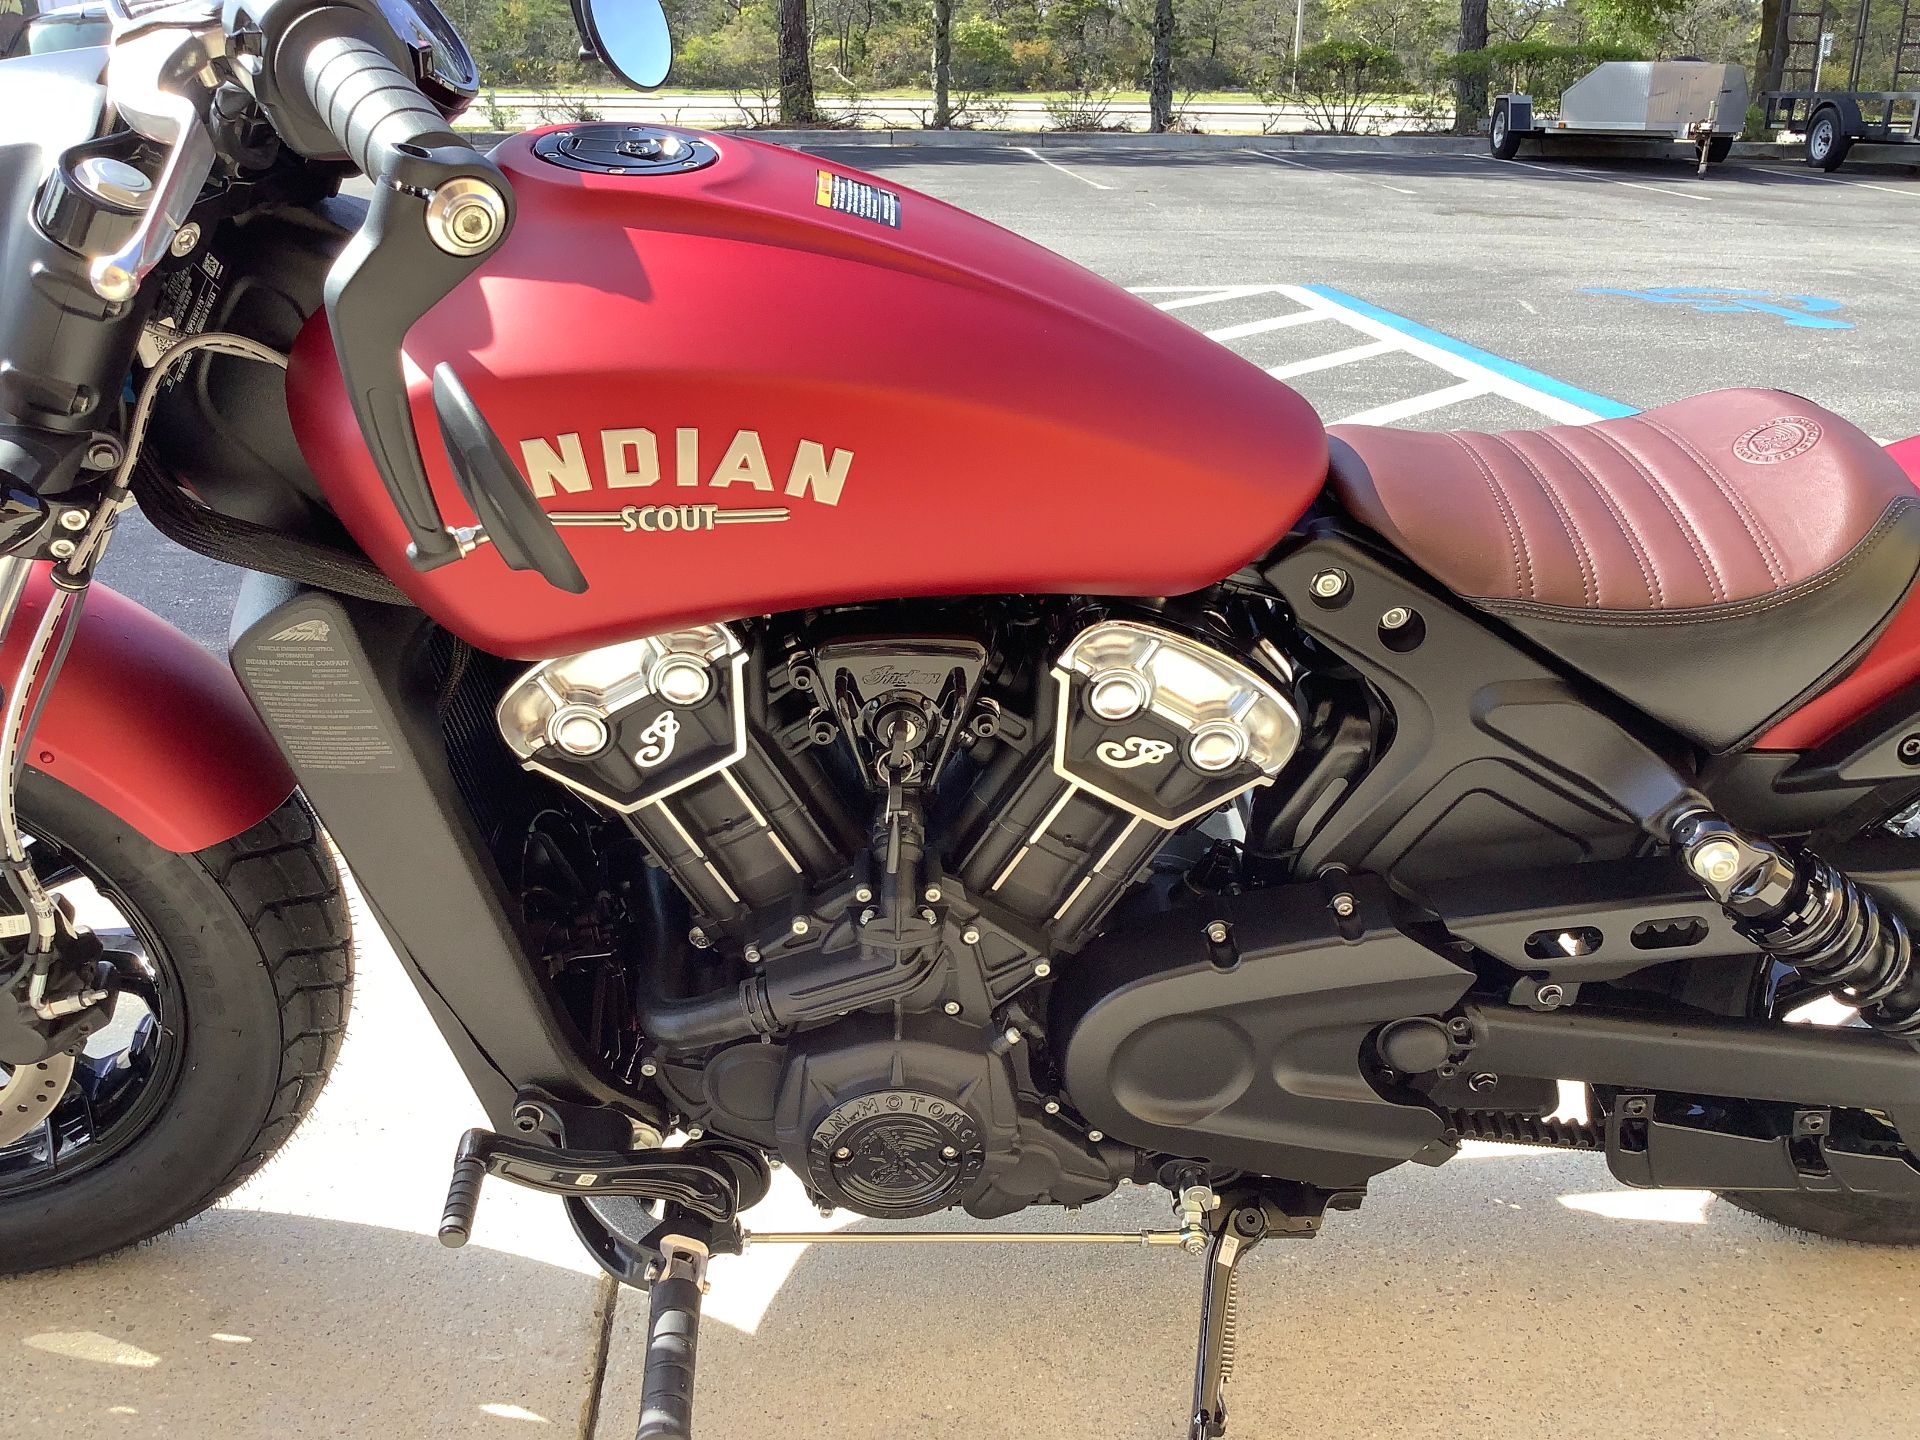 2023 Indian Motorcycle SCOUT BOBBER ABS in Panama City Beach, Florida - Photo 11